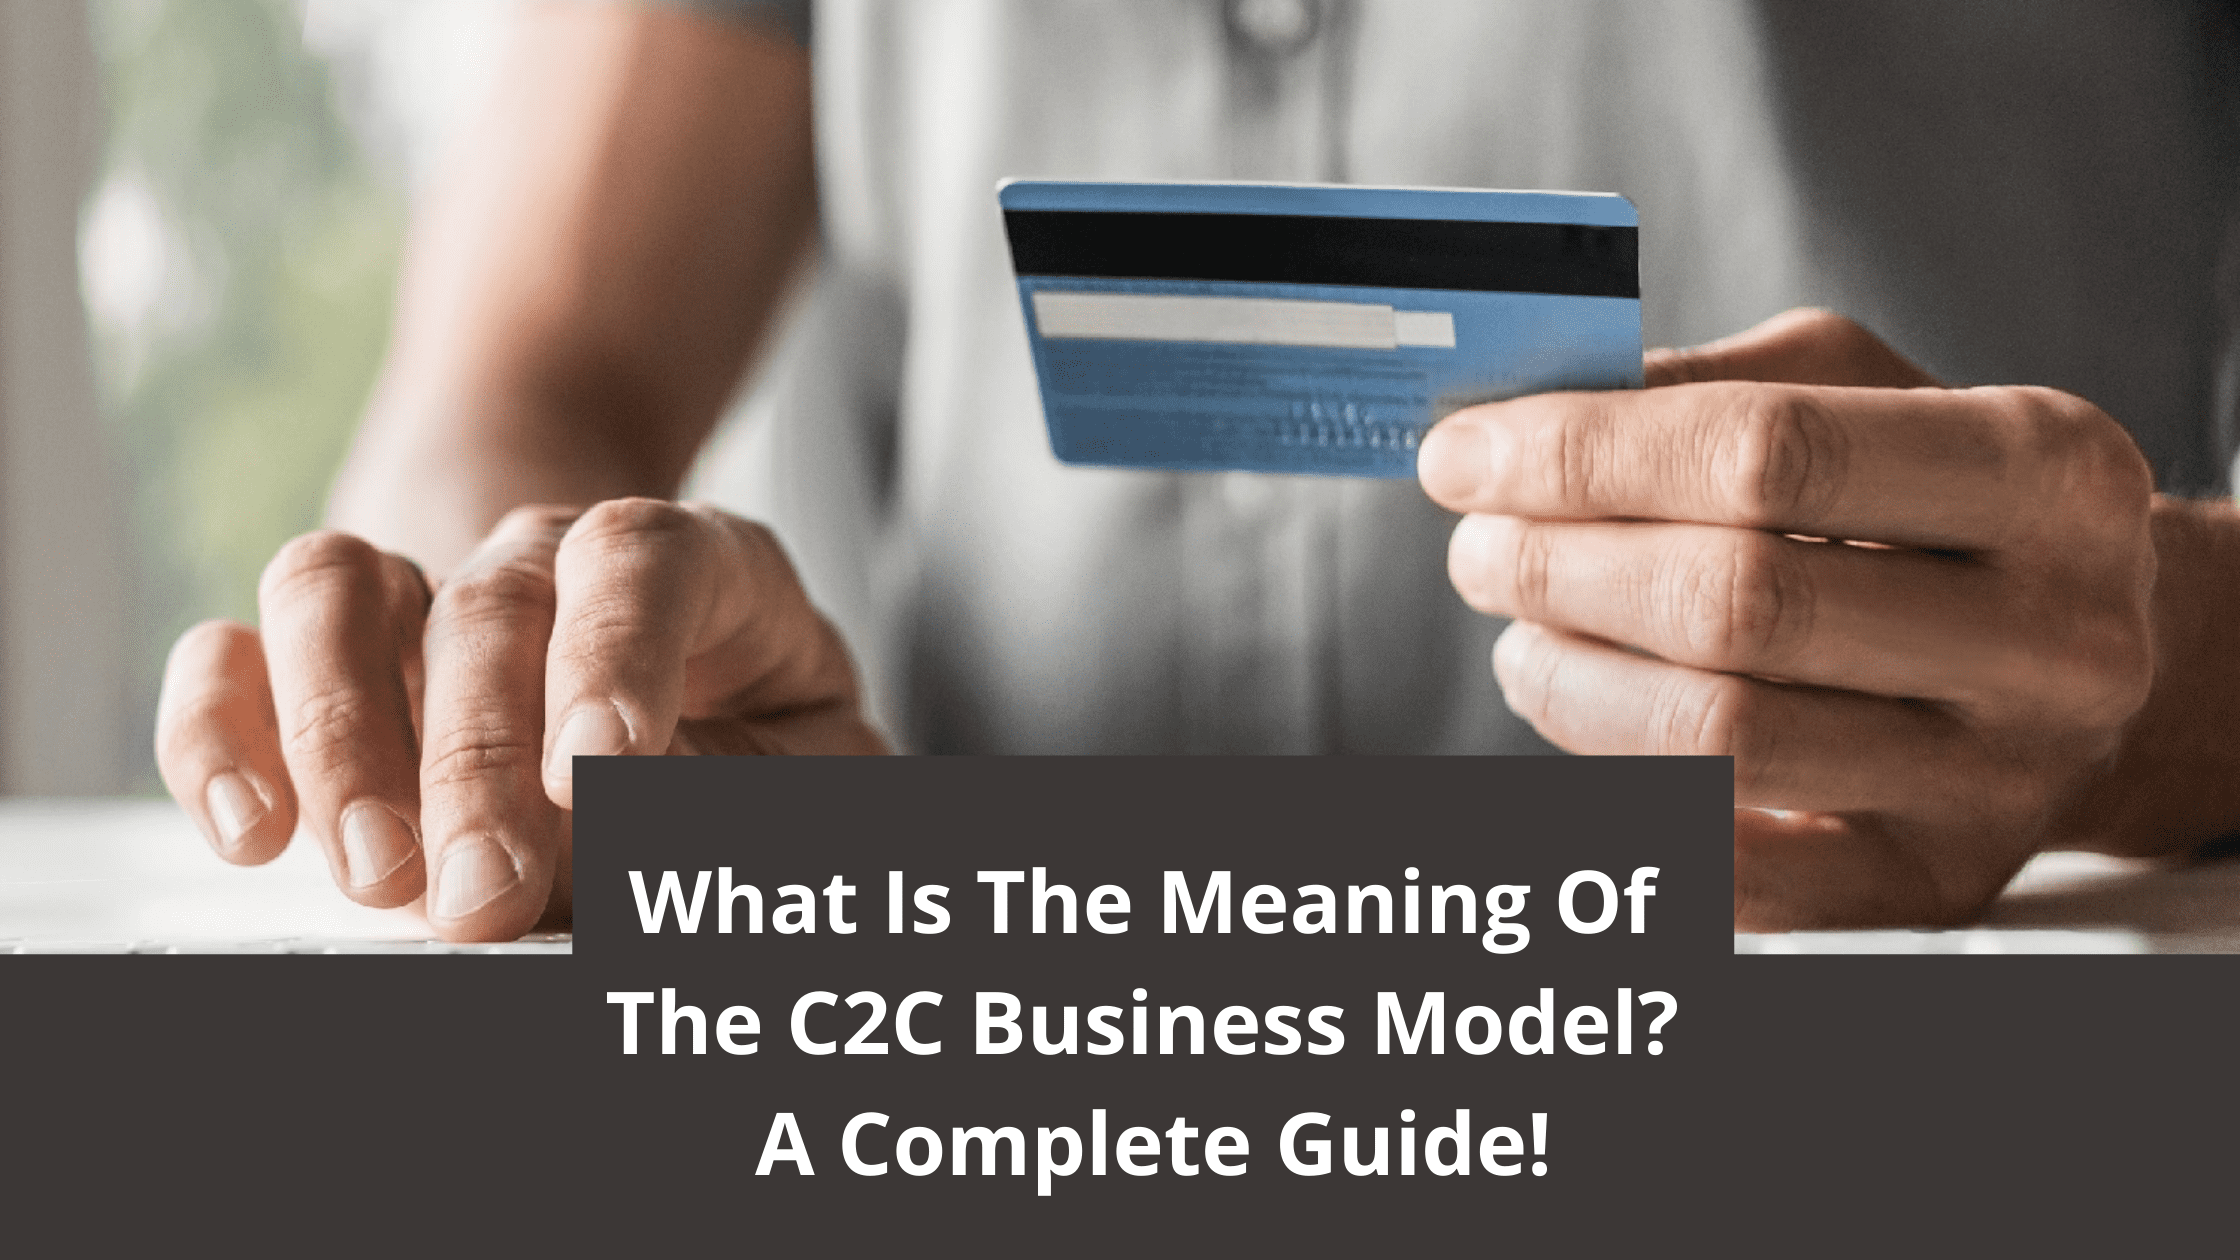 What Is The Meaning Of The C2C Business Model? A Complete Guide!